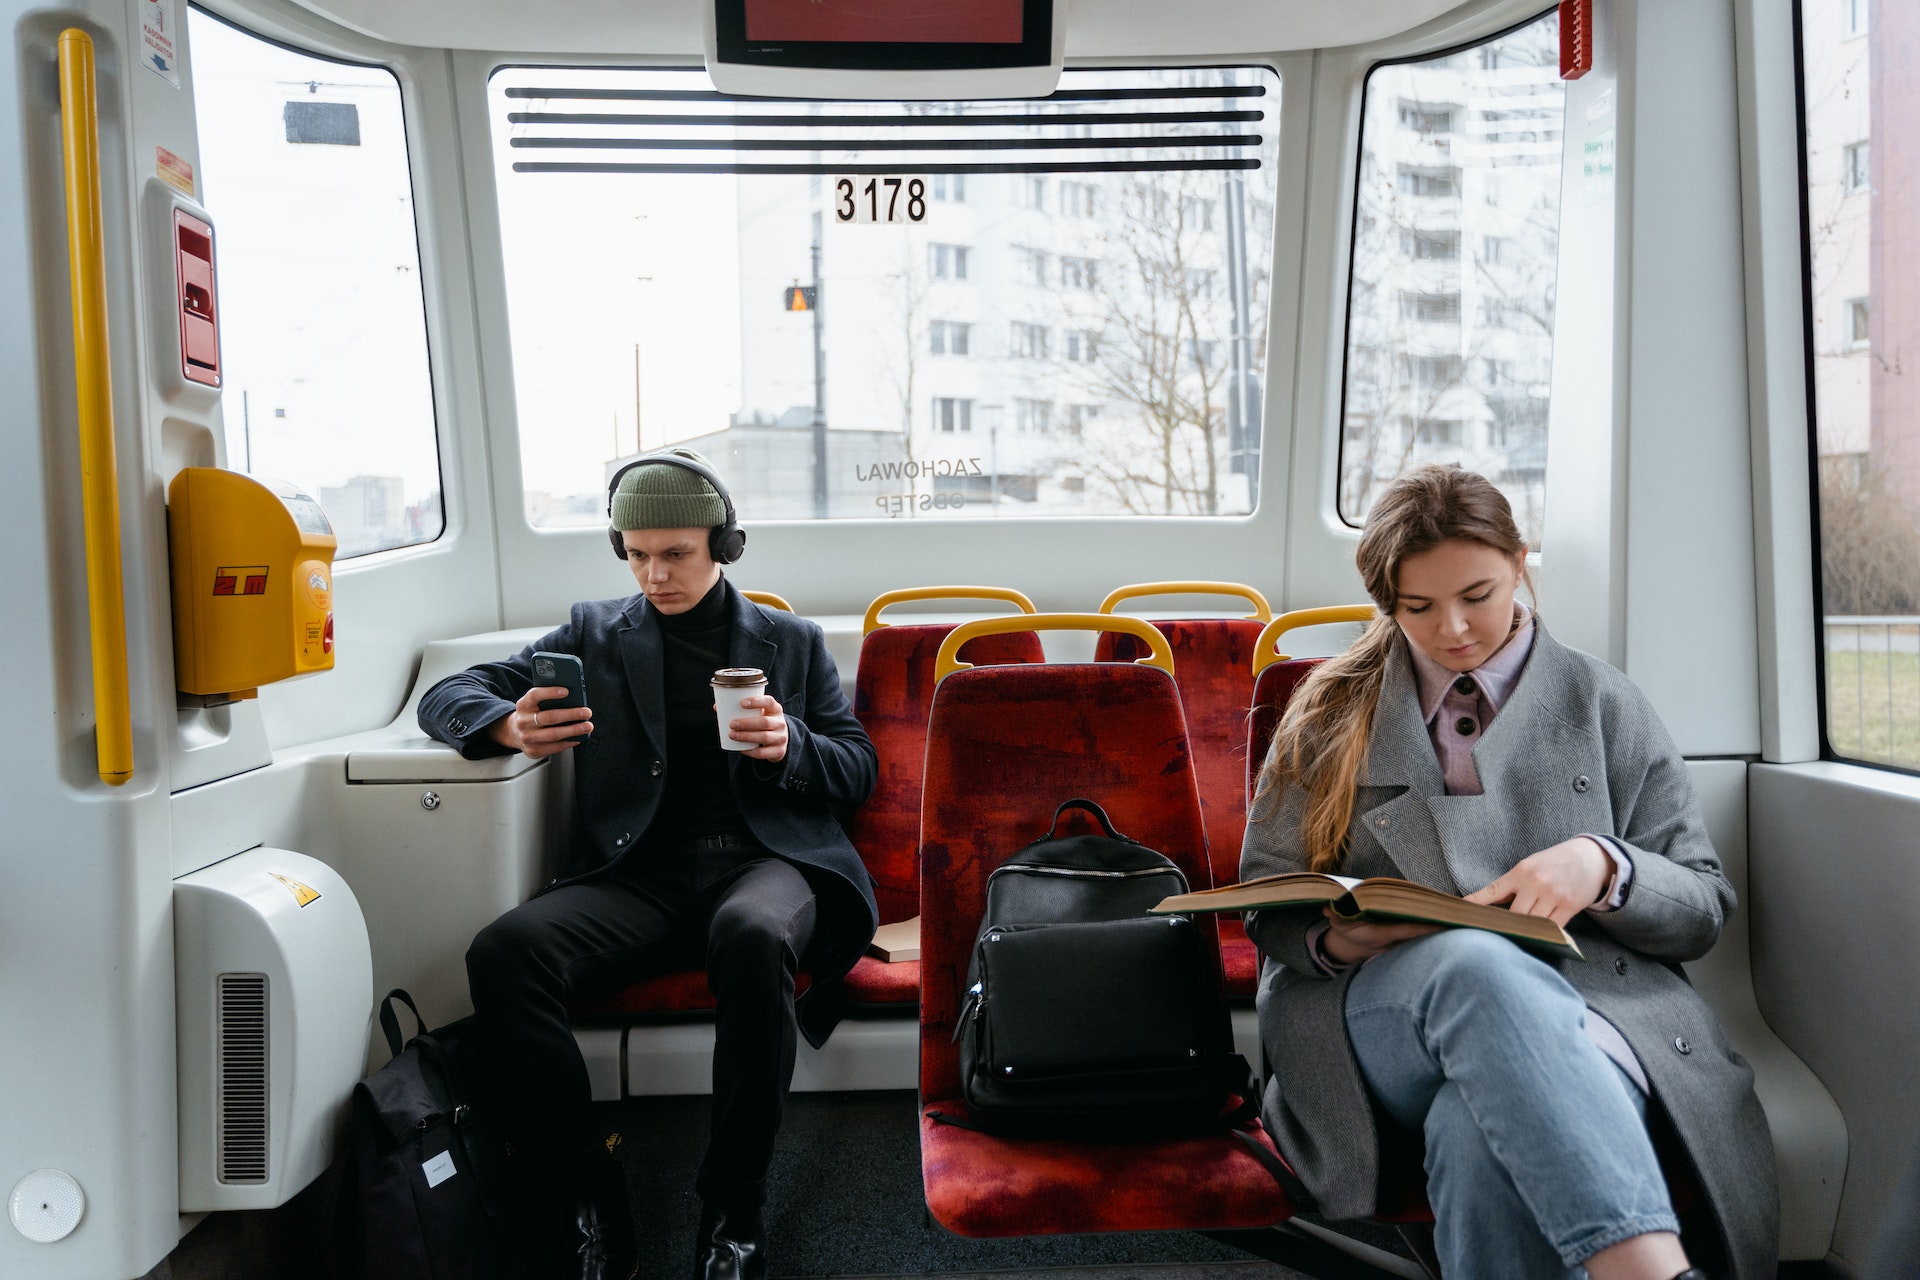 A Woman in Gray Coat Reading a Book while Sitting Near the Man Wearing Headphones while Holding His Mobile